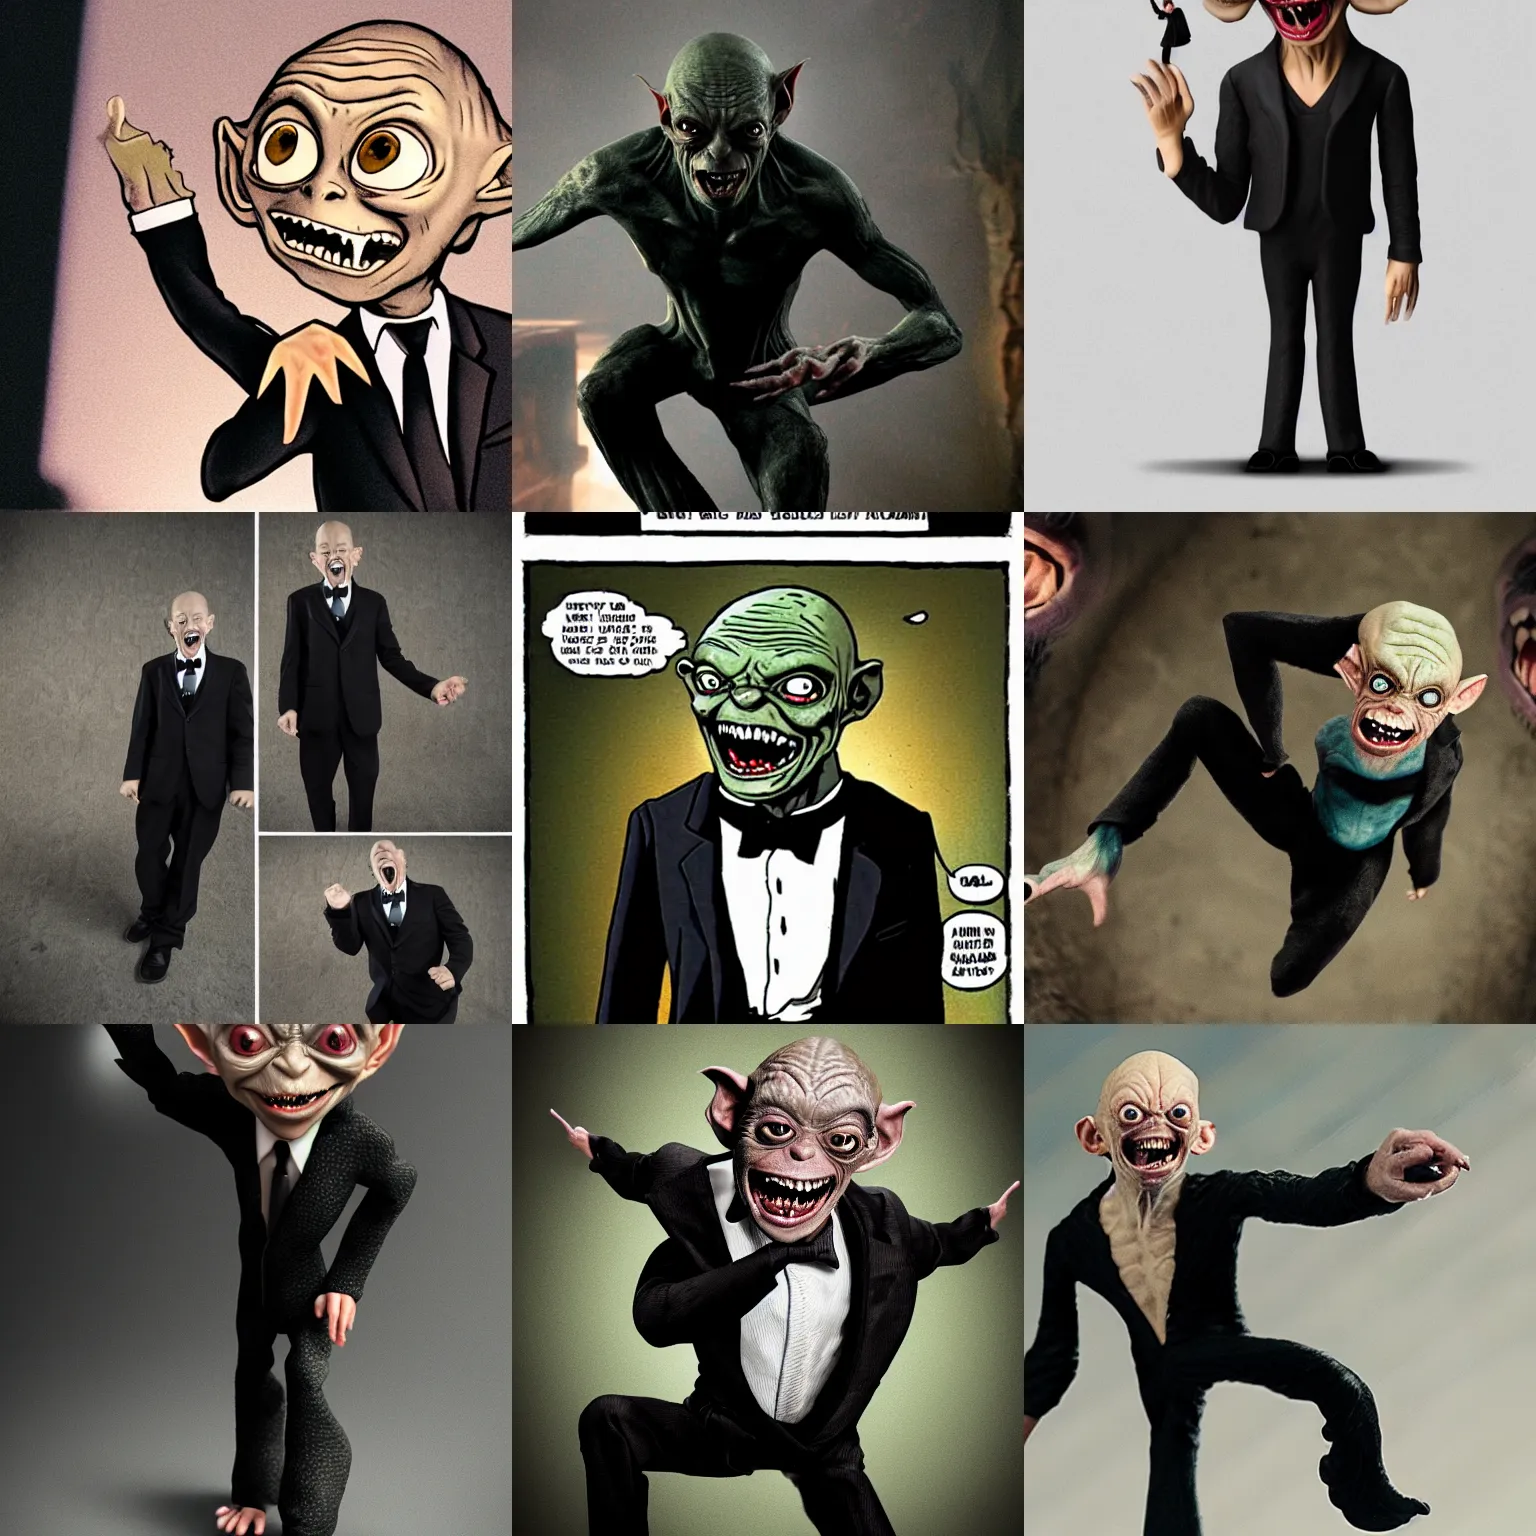 Prompt: Gollum with maniacal laughter in black suit